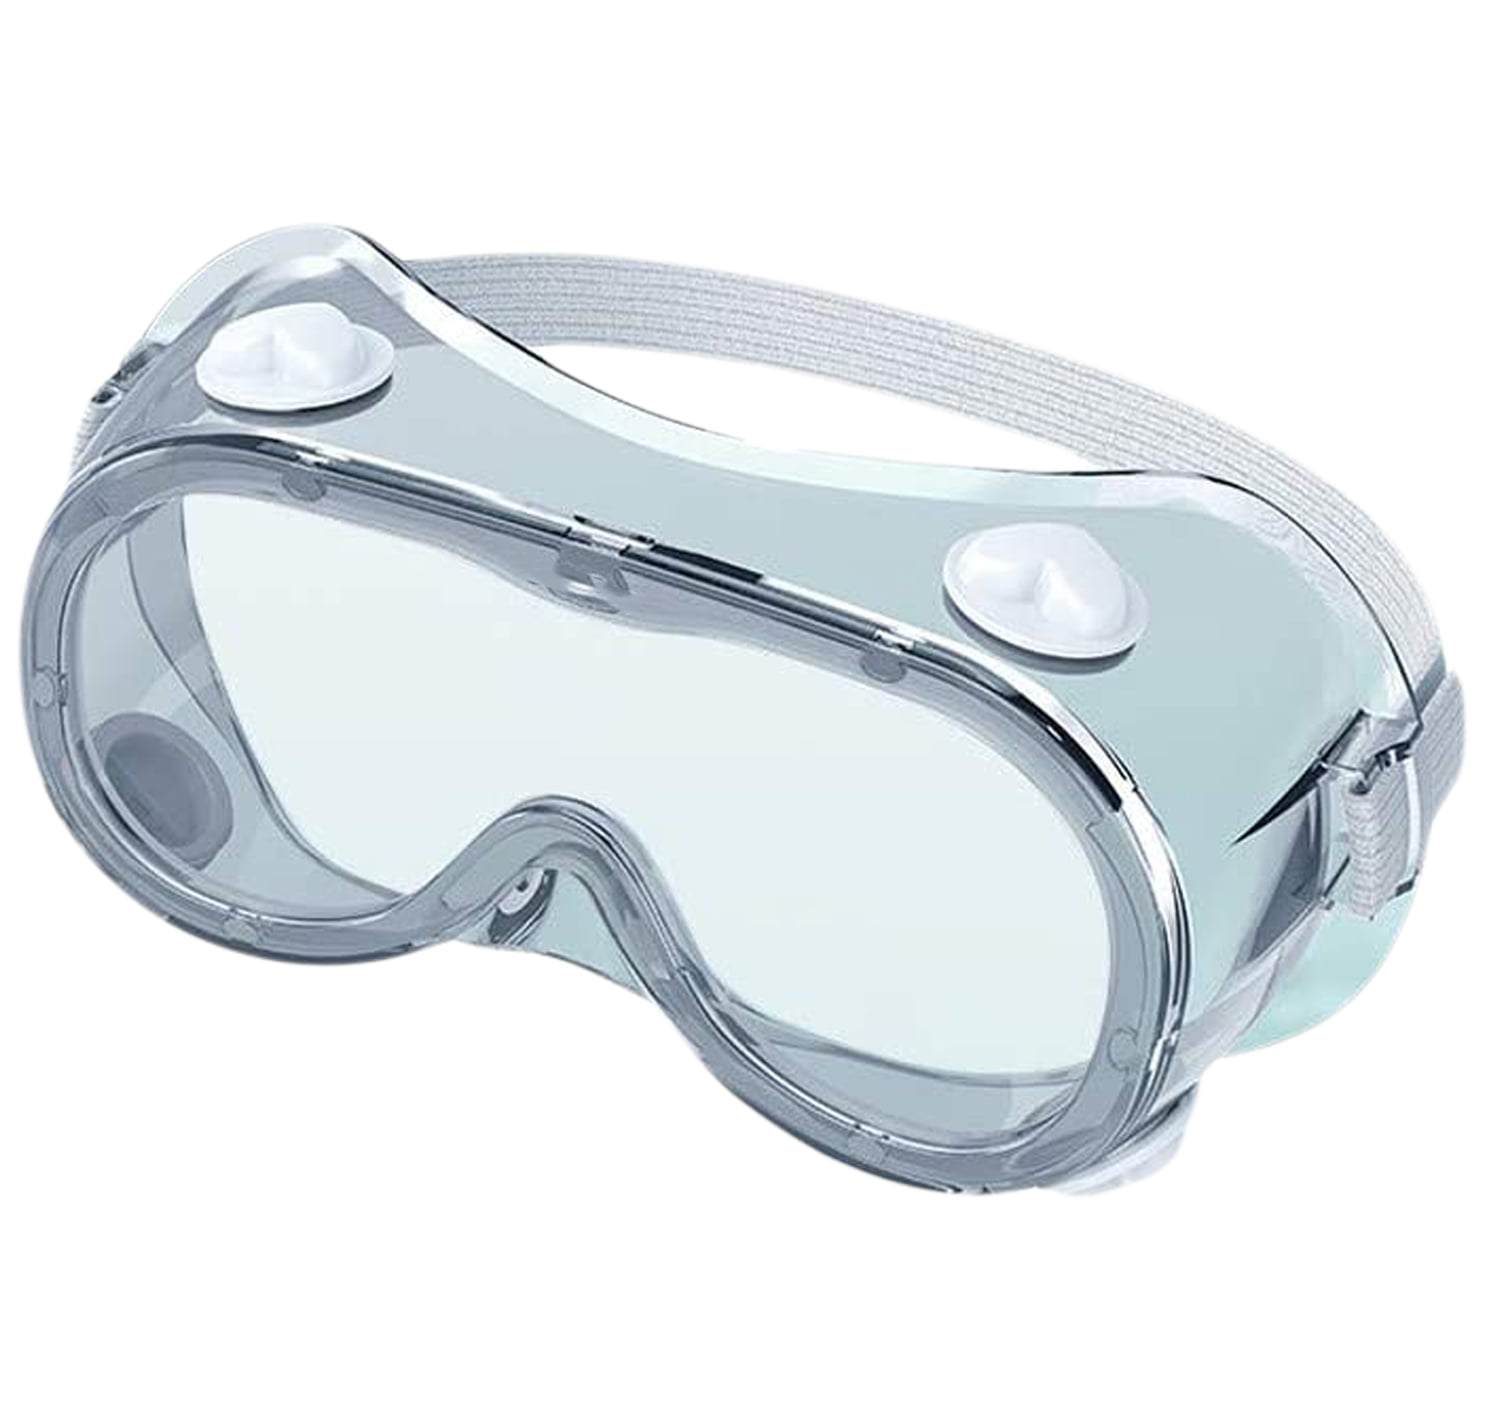 Details about   Anti Pollen Safety Goggles Glasses Anti Fog  Blue  Light   Glasses 